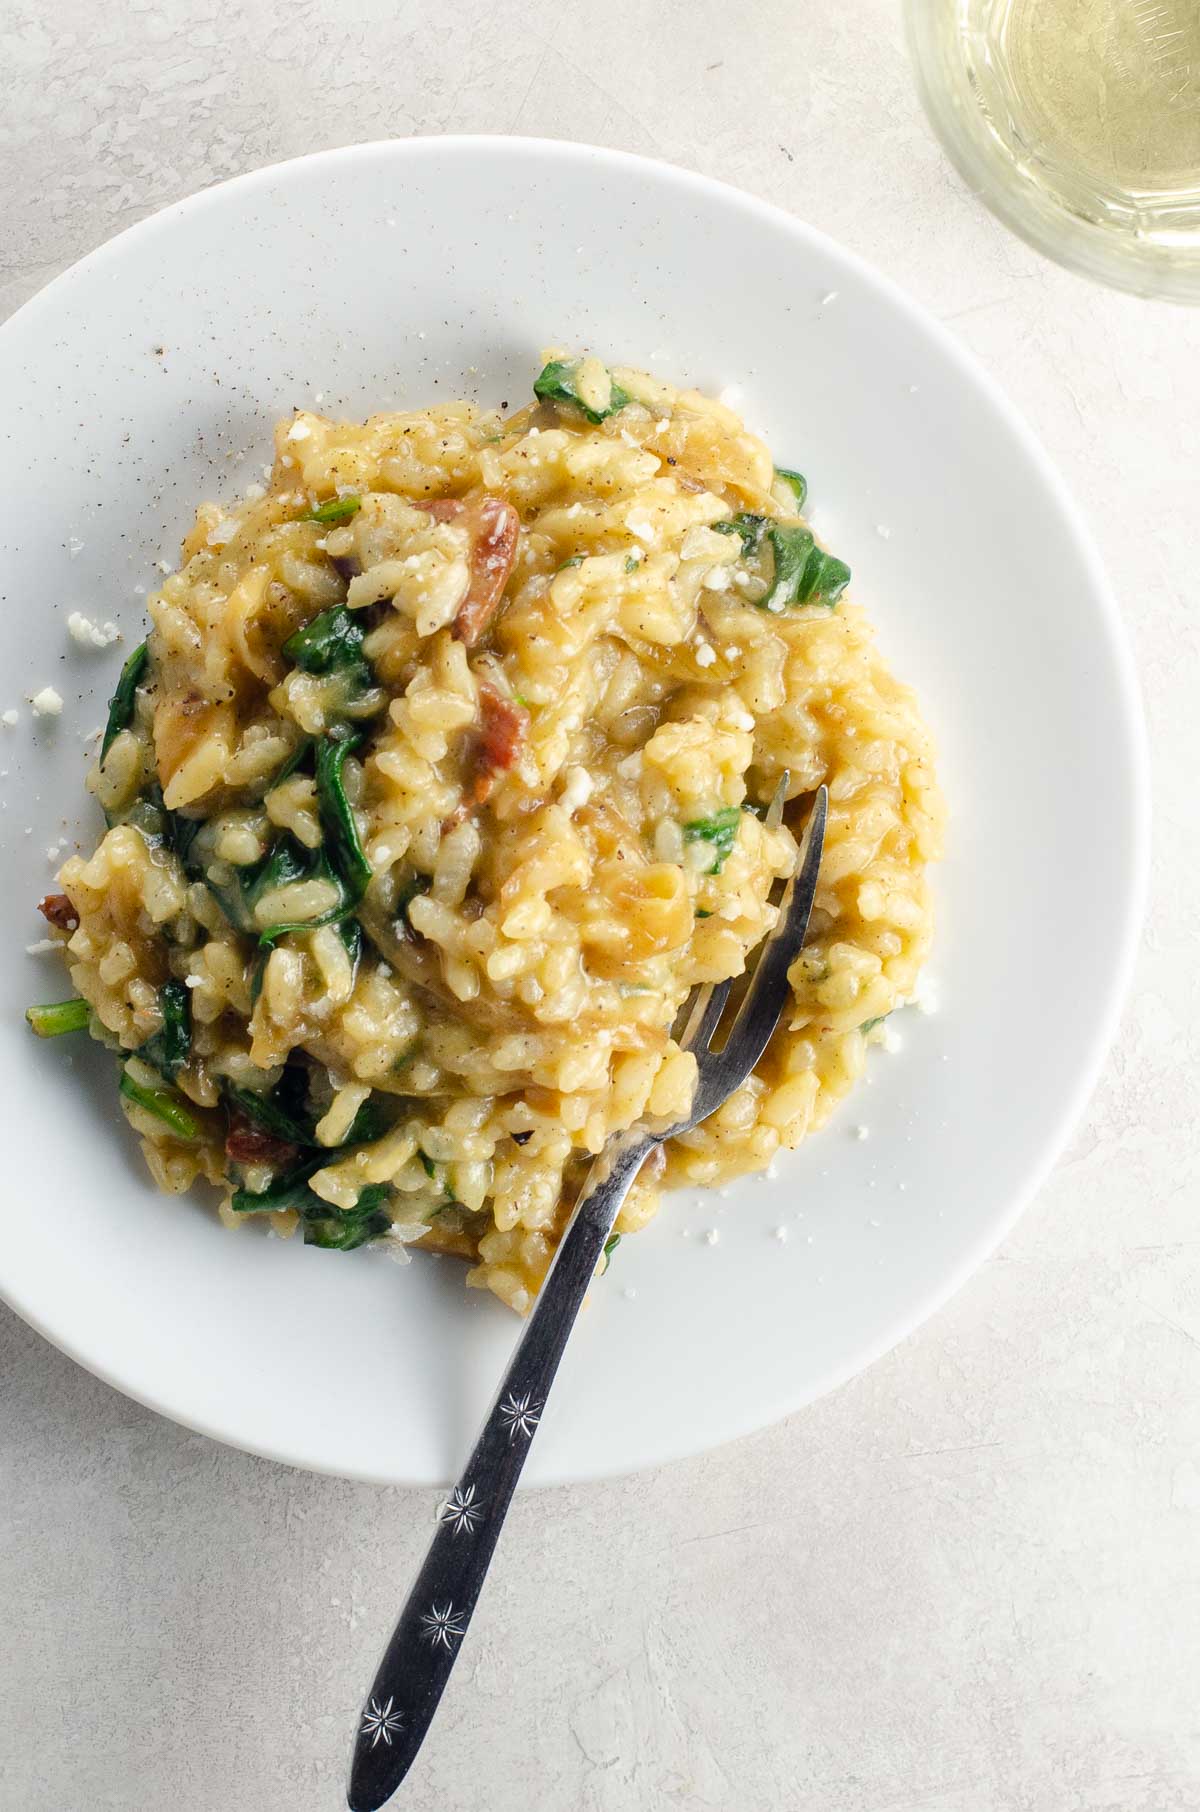 Caramelized Onion, Spinach and Bacon Risotto on a white plate